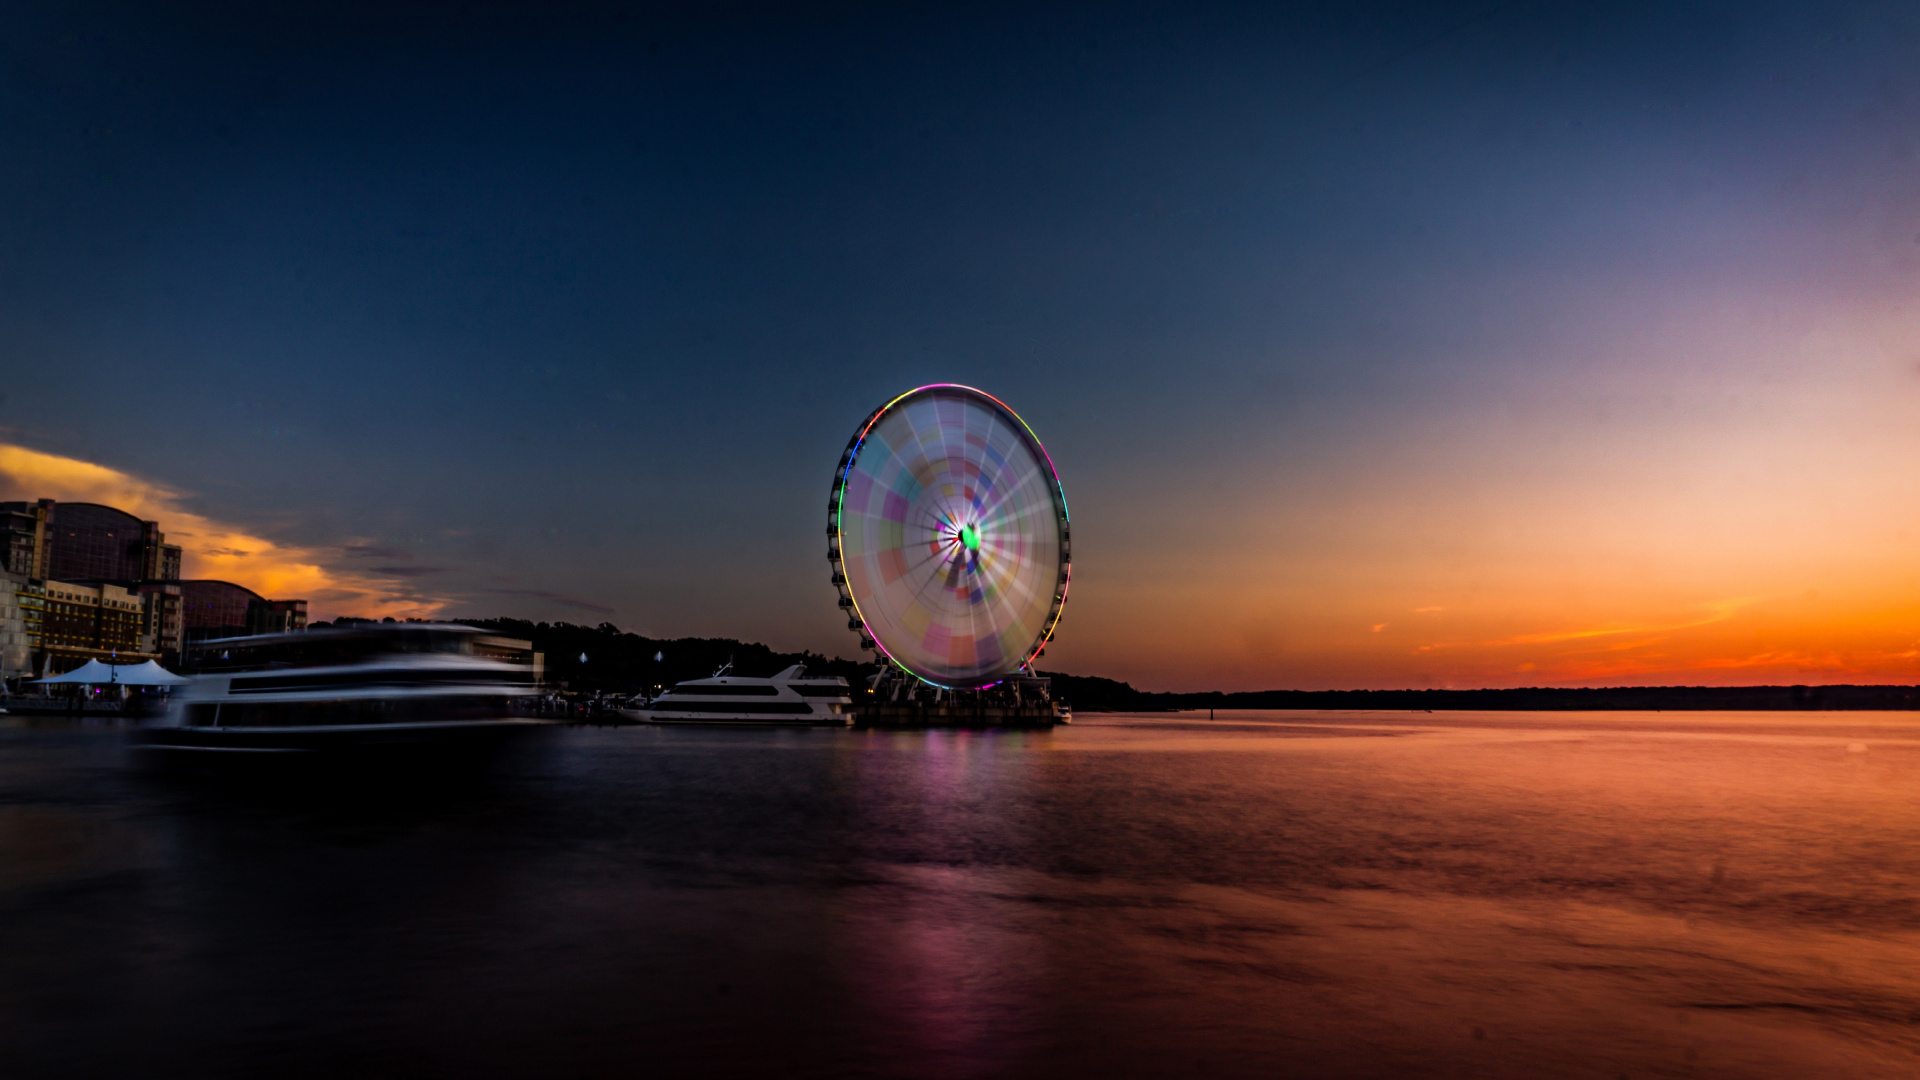 Ferris Wheel Near Body of Water During Night Time. Wallpaper in 1920x1080 Resolution